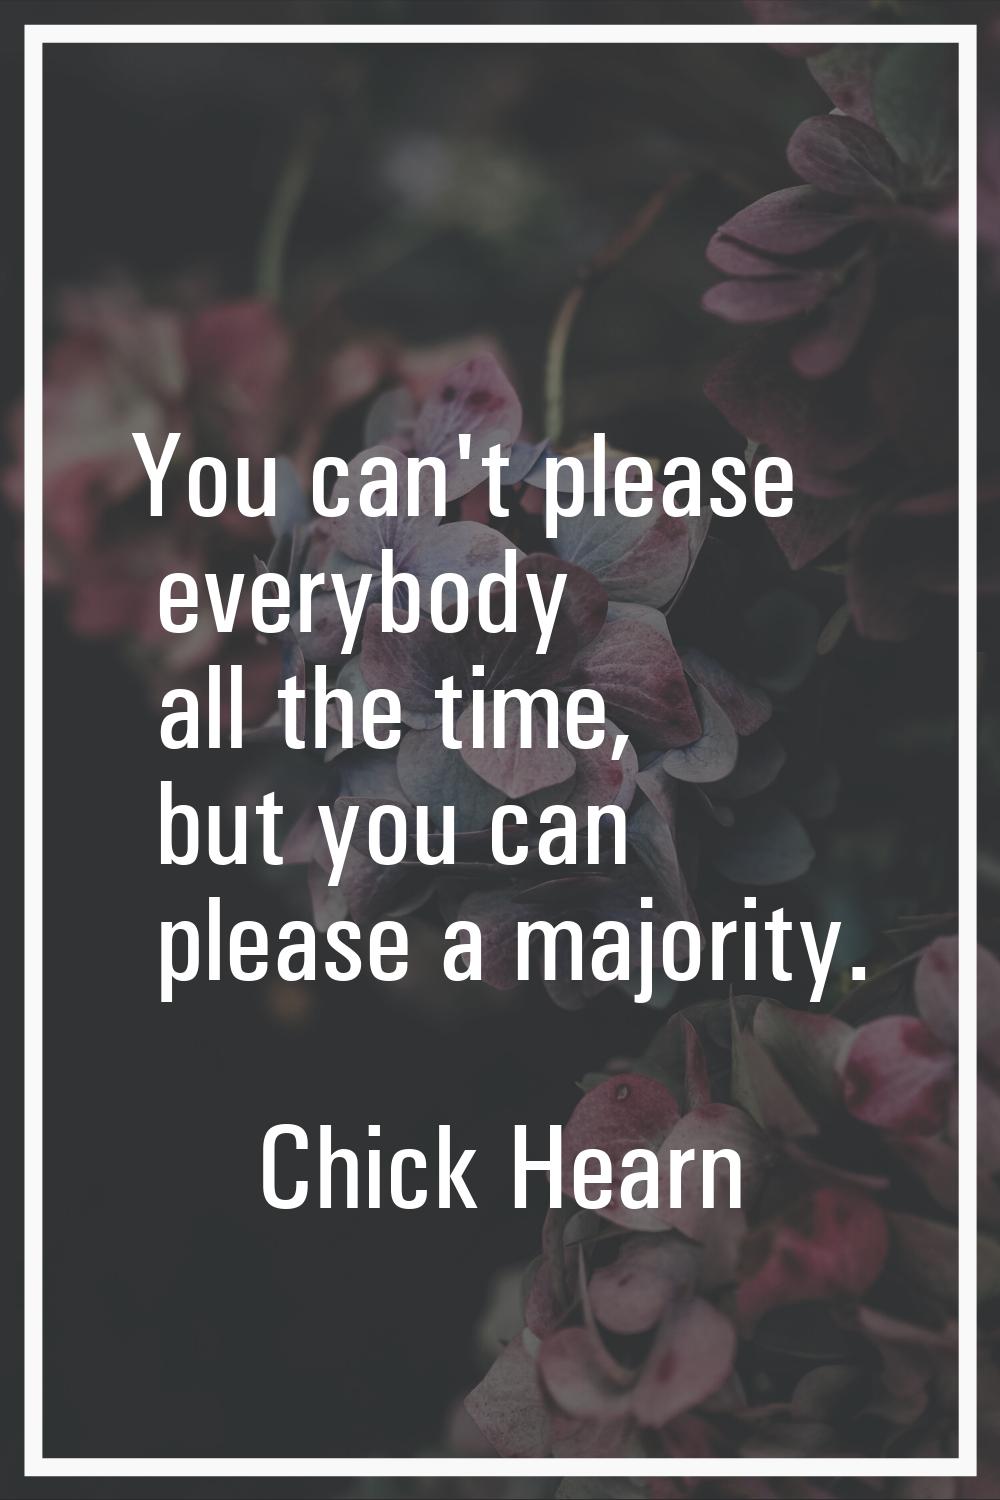 You can't please everybody all the time, but you can please a majority.